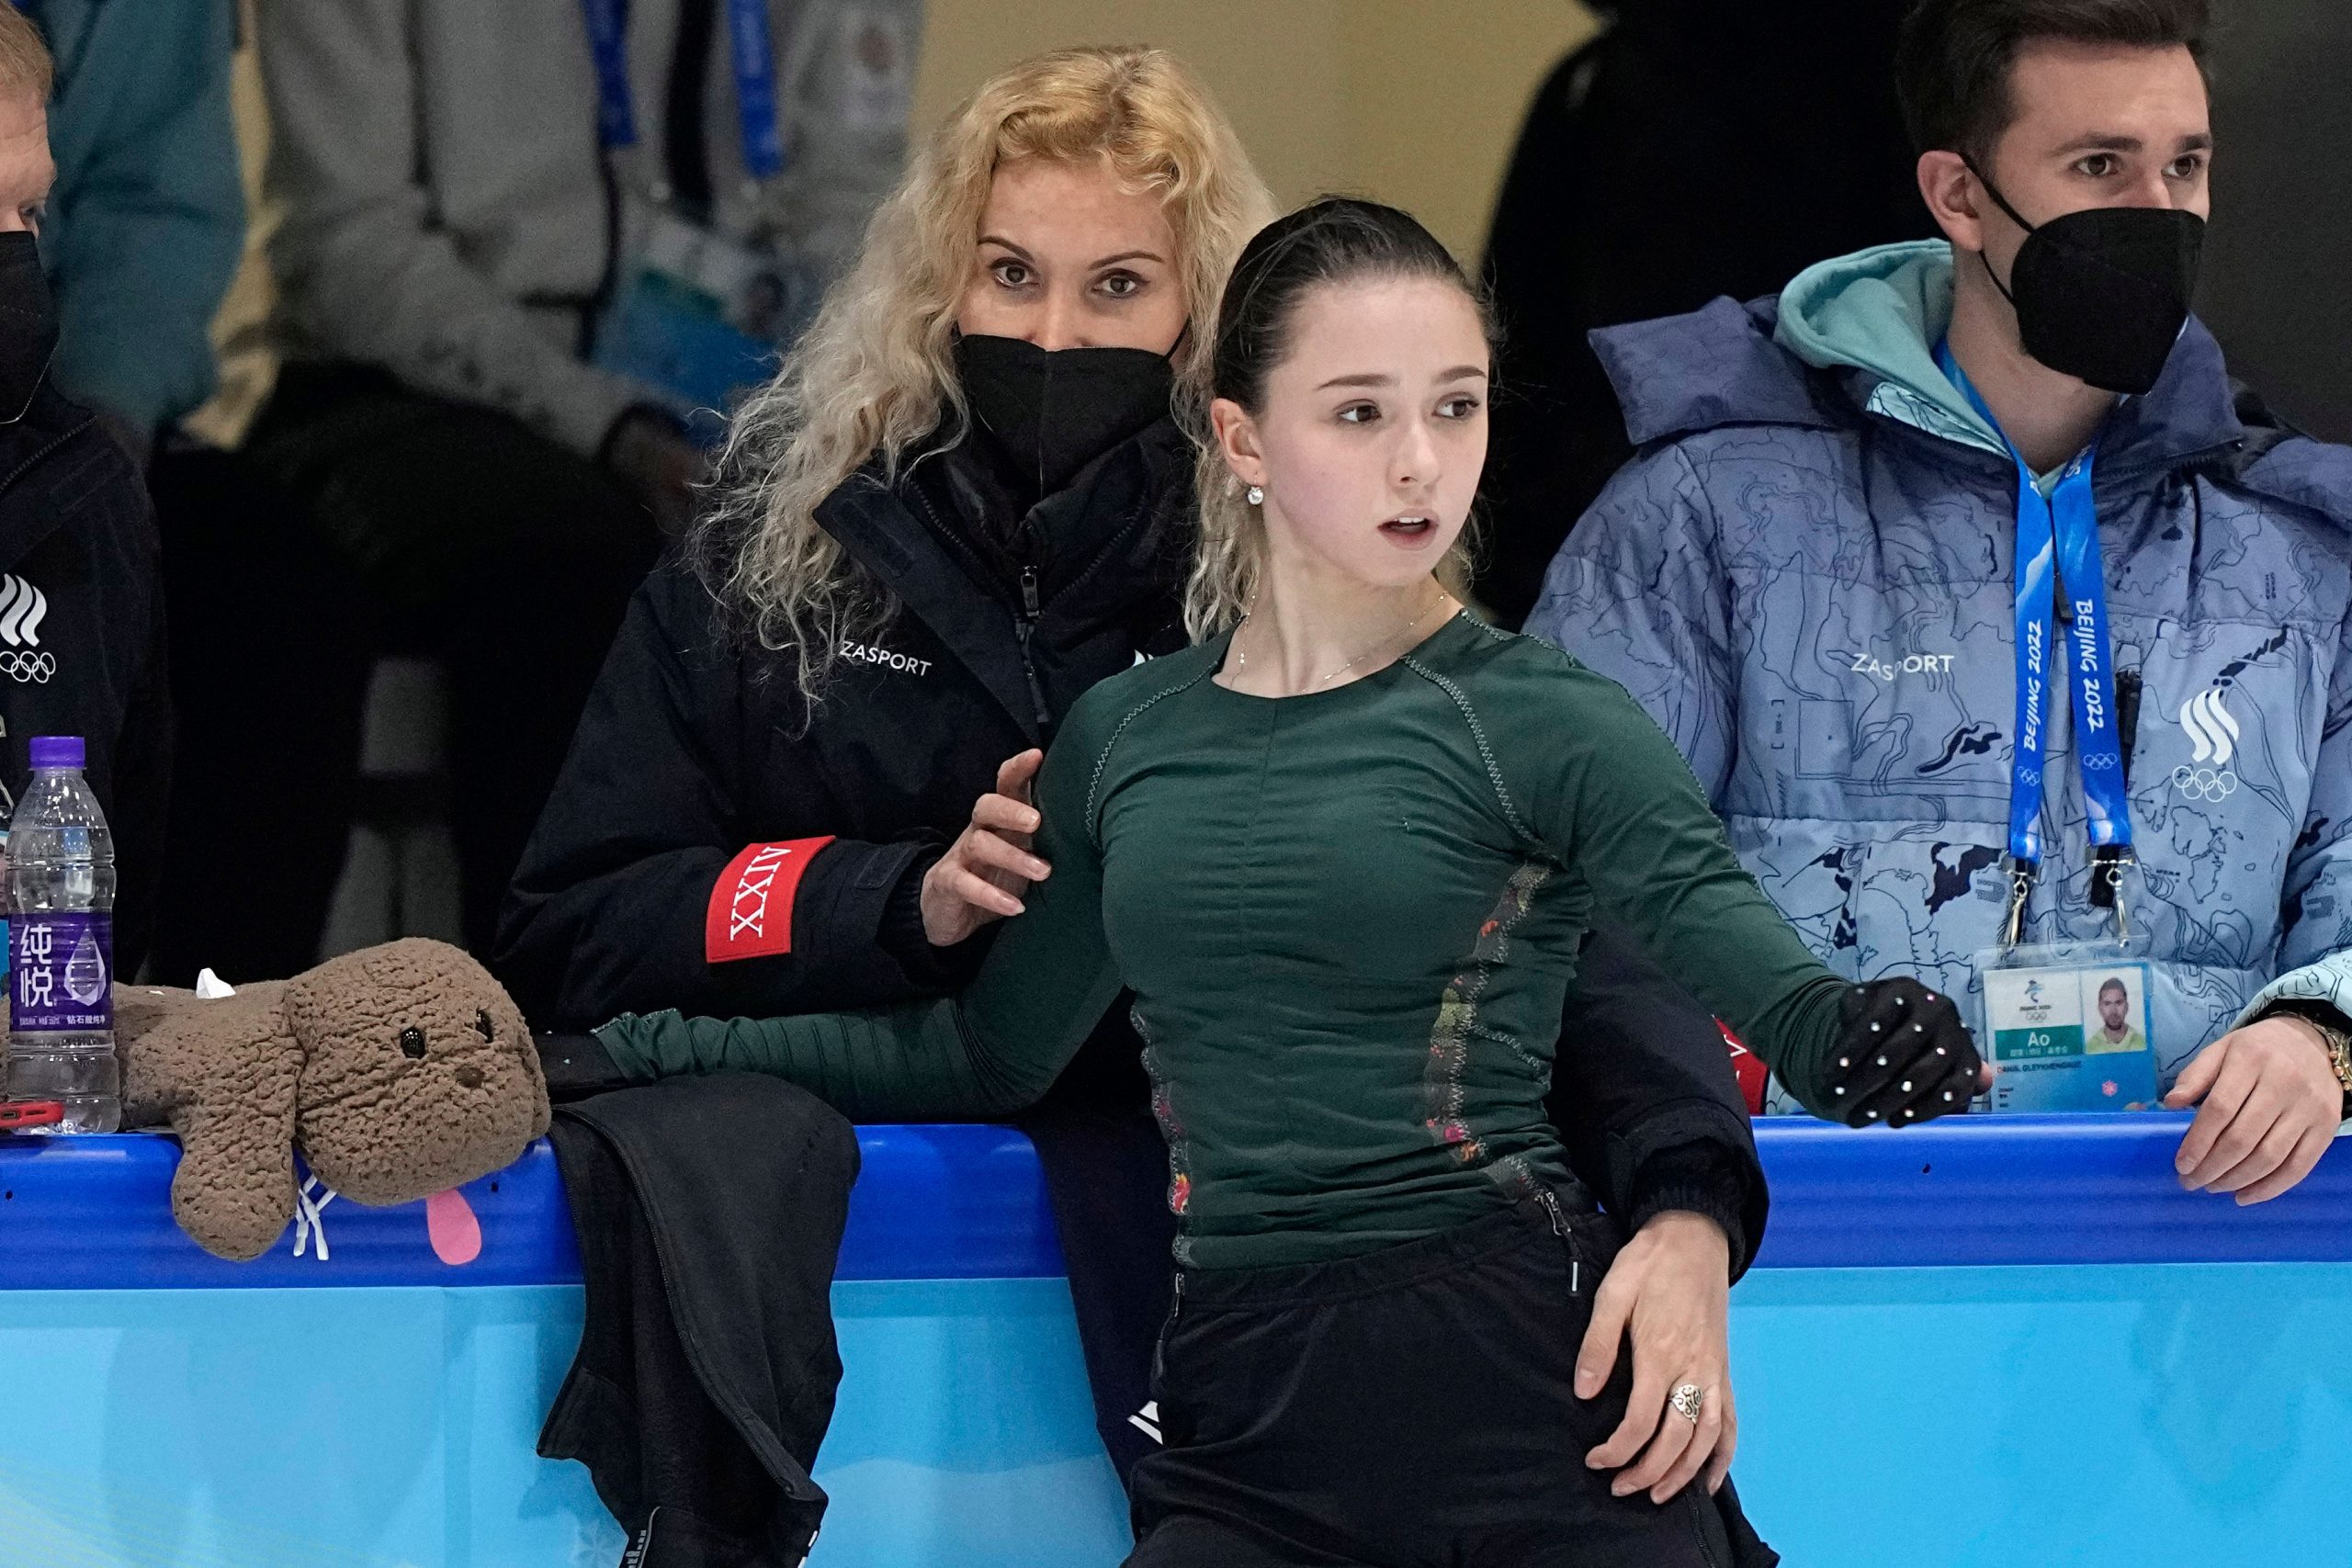 Winter Olympics 2022: Court rules Russian skater Valieva can compete